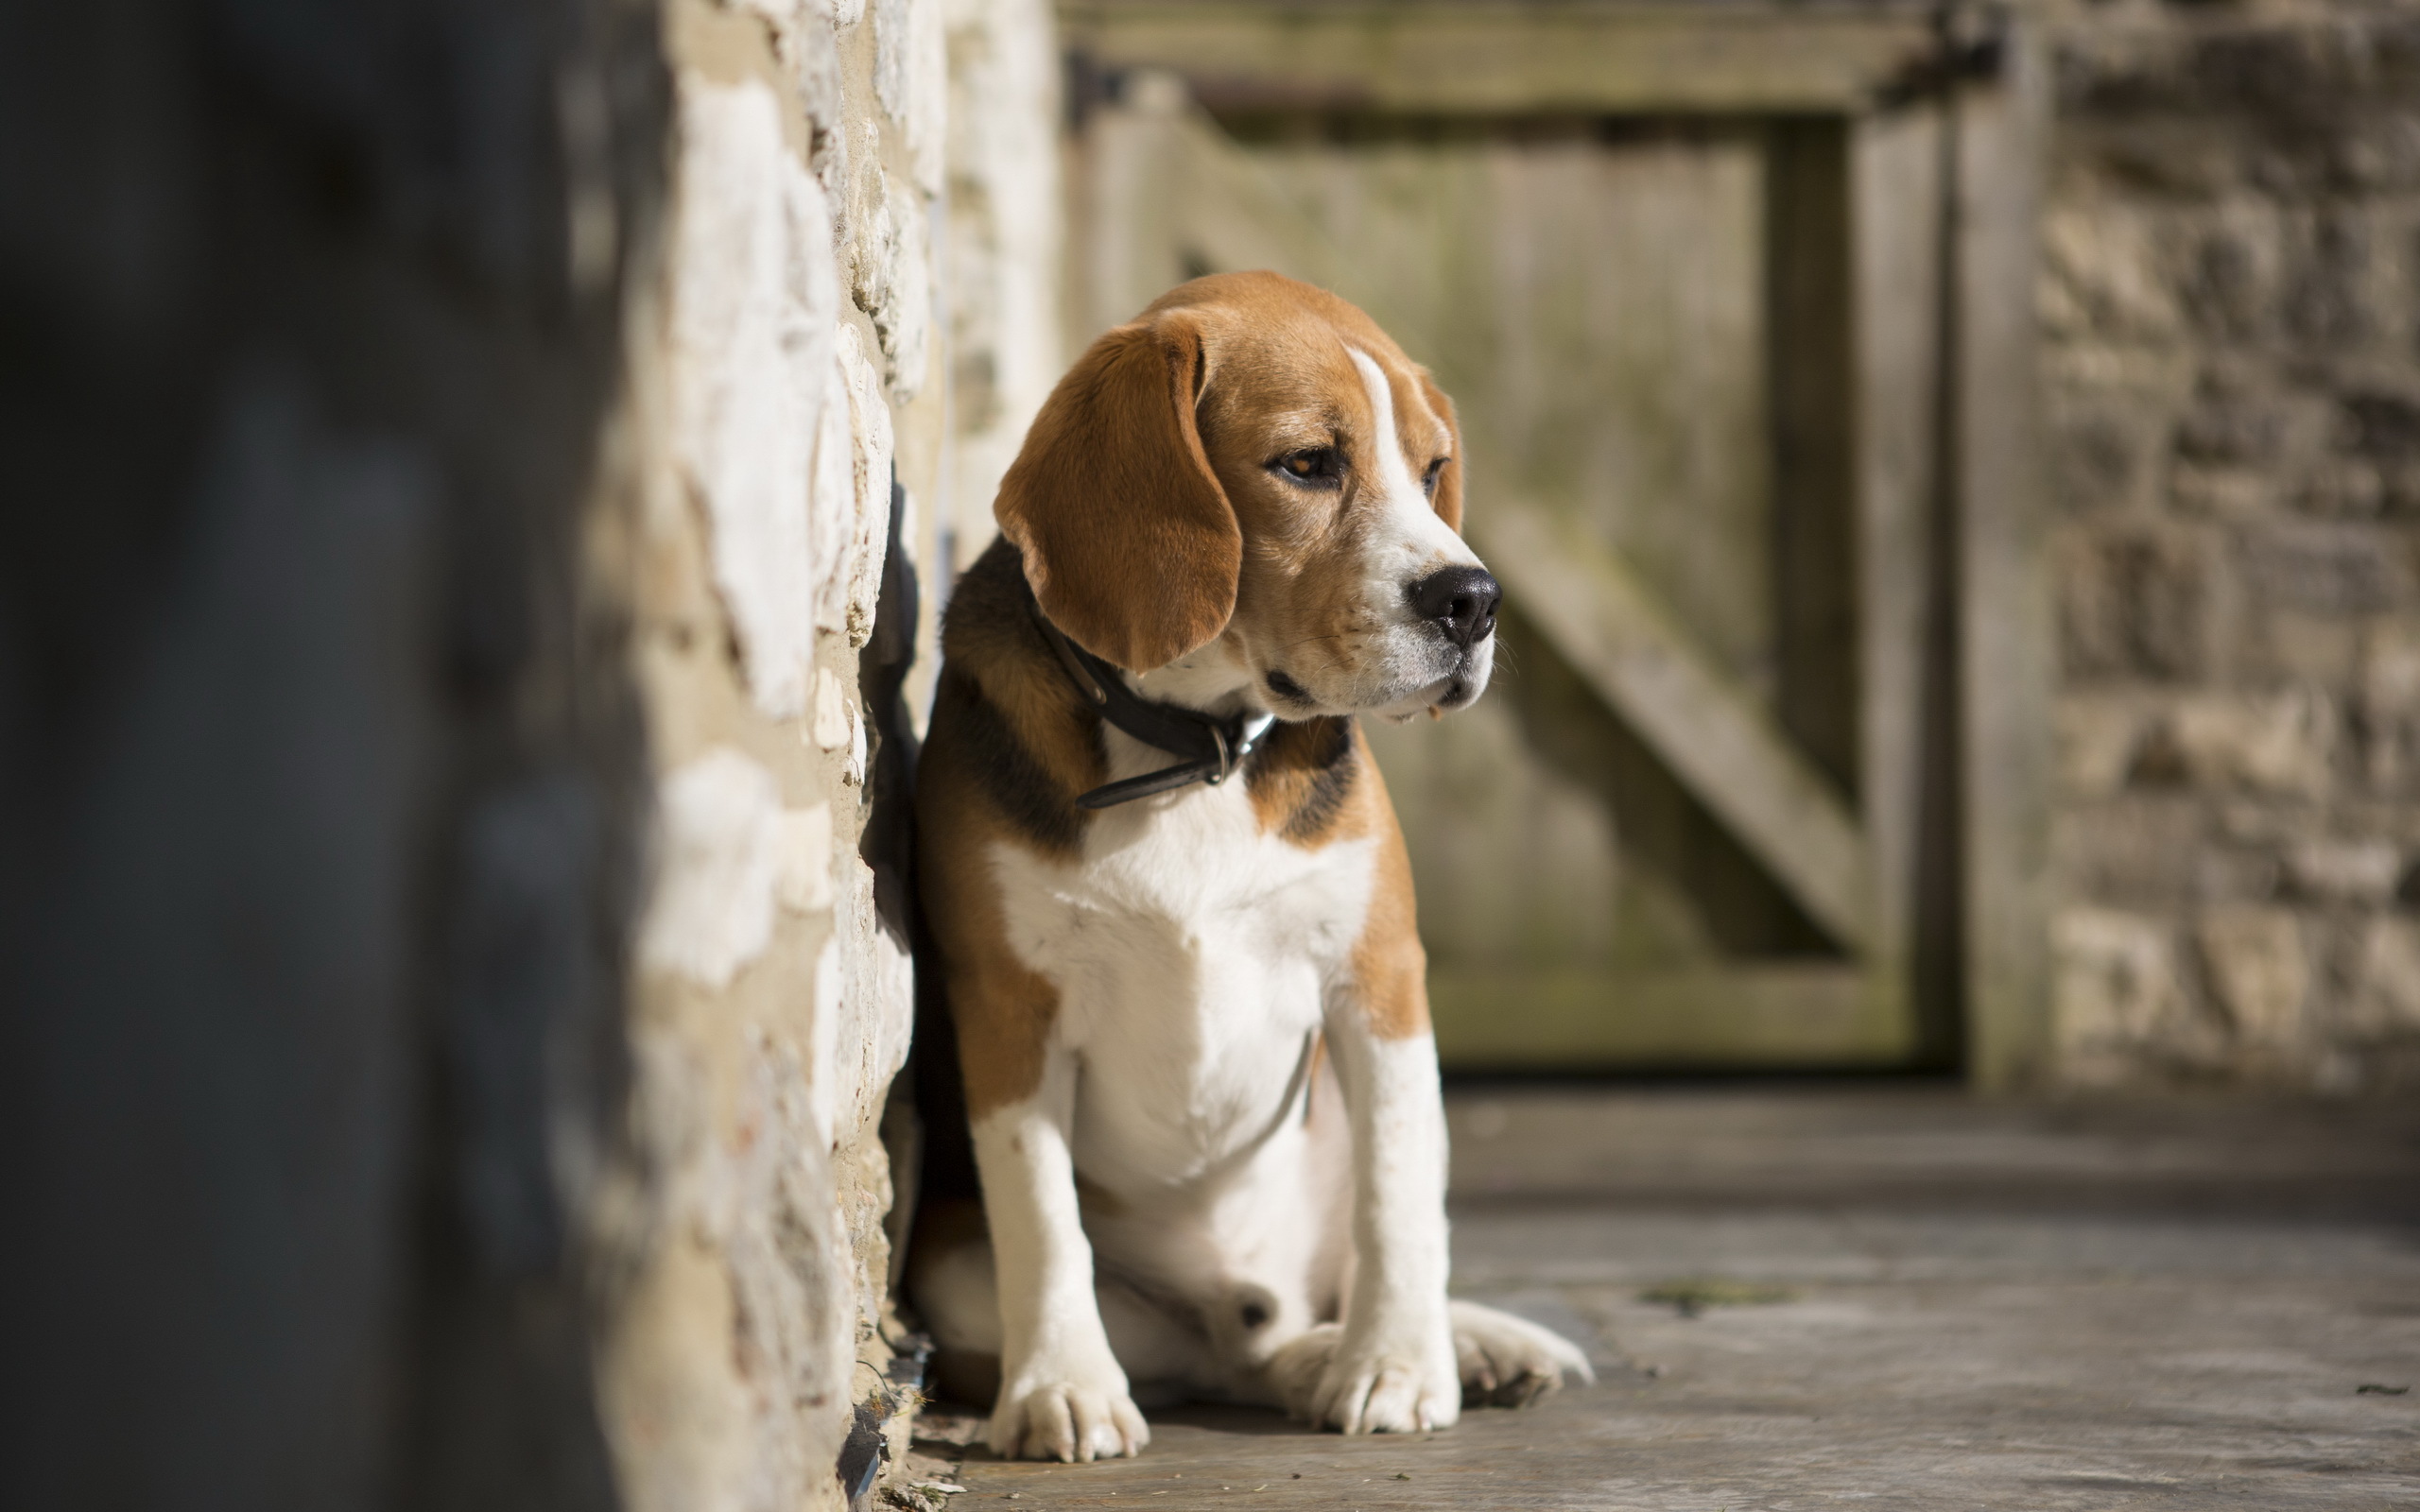 Sad Beagle Dog Sitting On The Cold Floor Wallpaper And Image